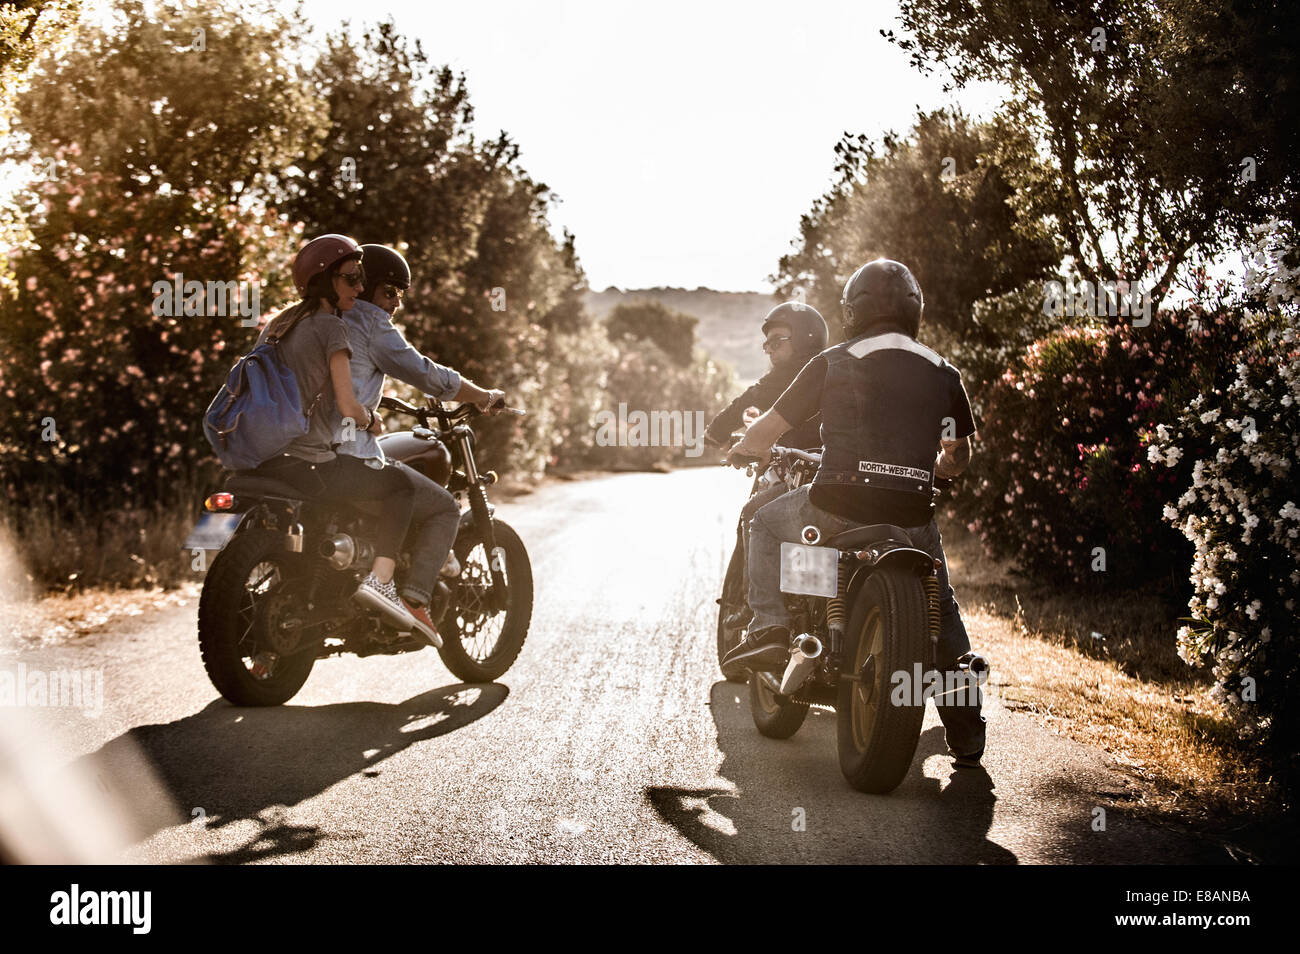 Rear view of four friends on motorcycles chatting on rural road, Cagliari, Sardinia, Italy Stock Photo